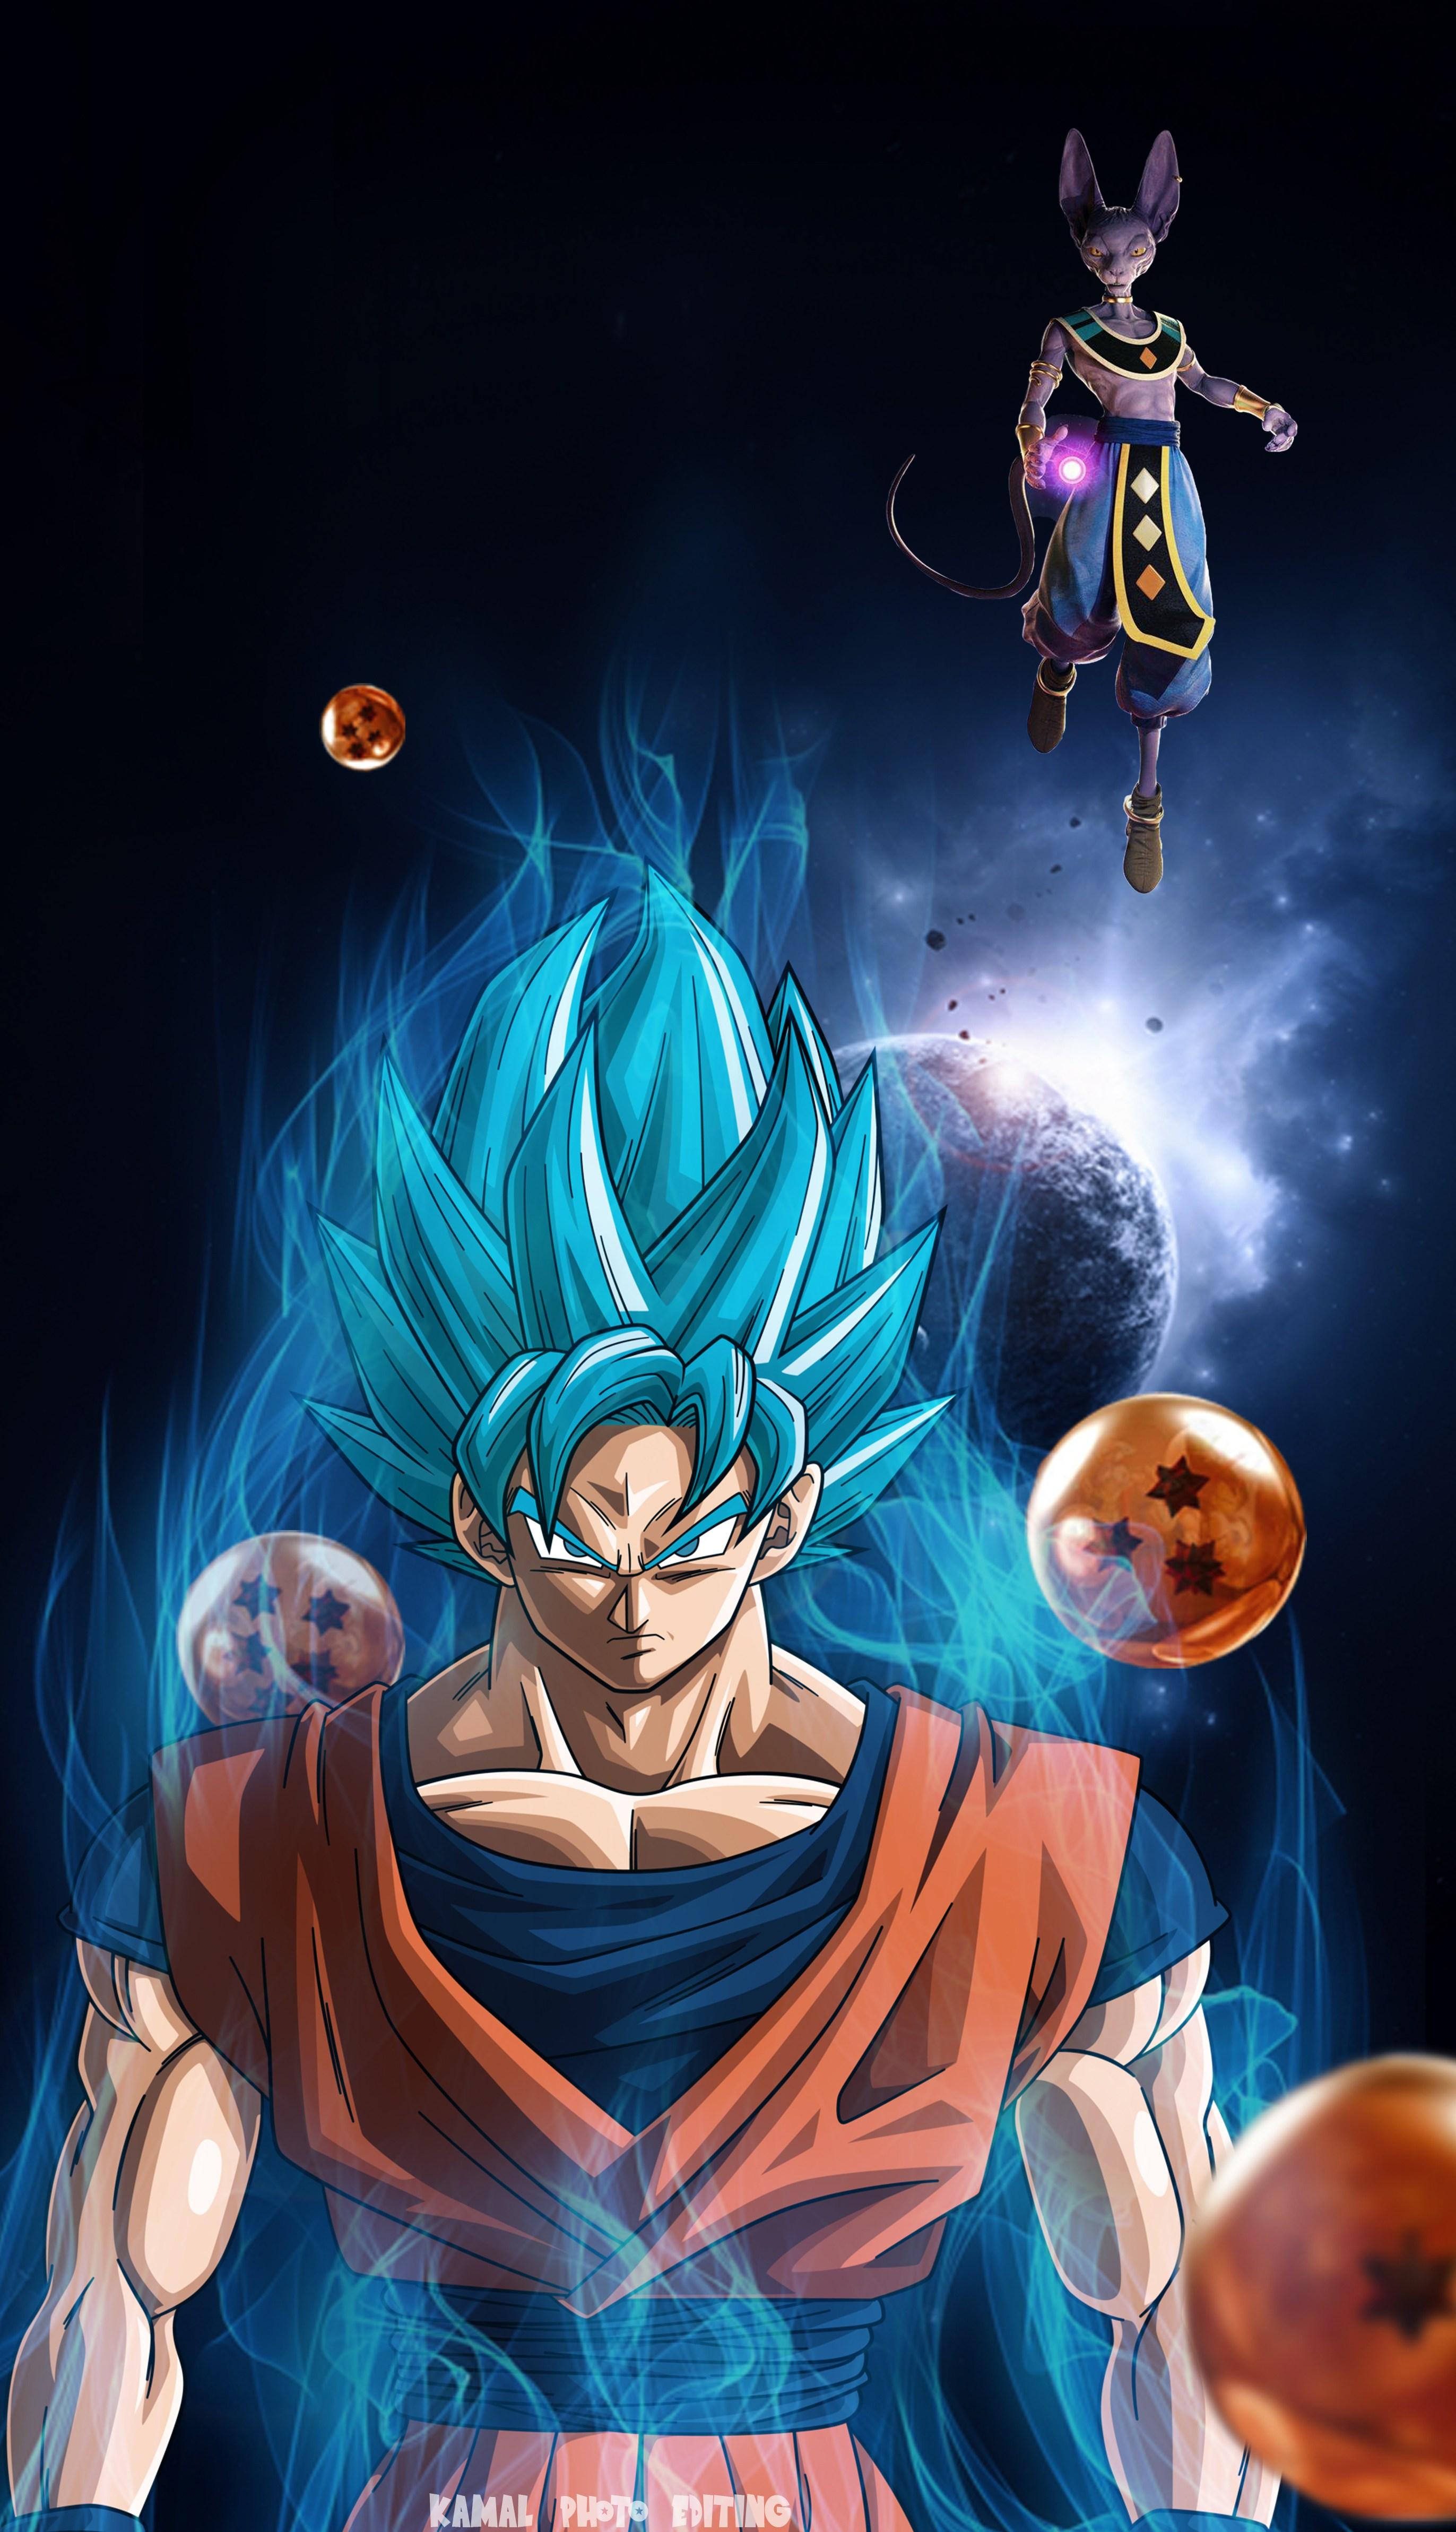 Dbz Live Wallpapers Iphone posted by Ethan Mercado